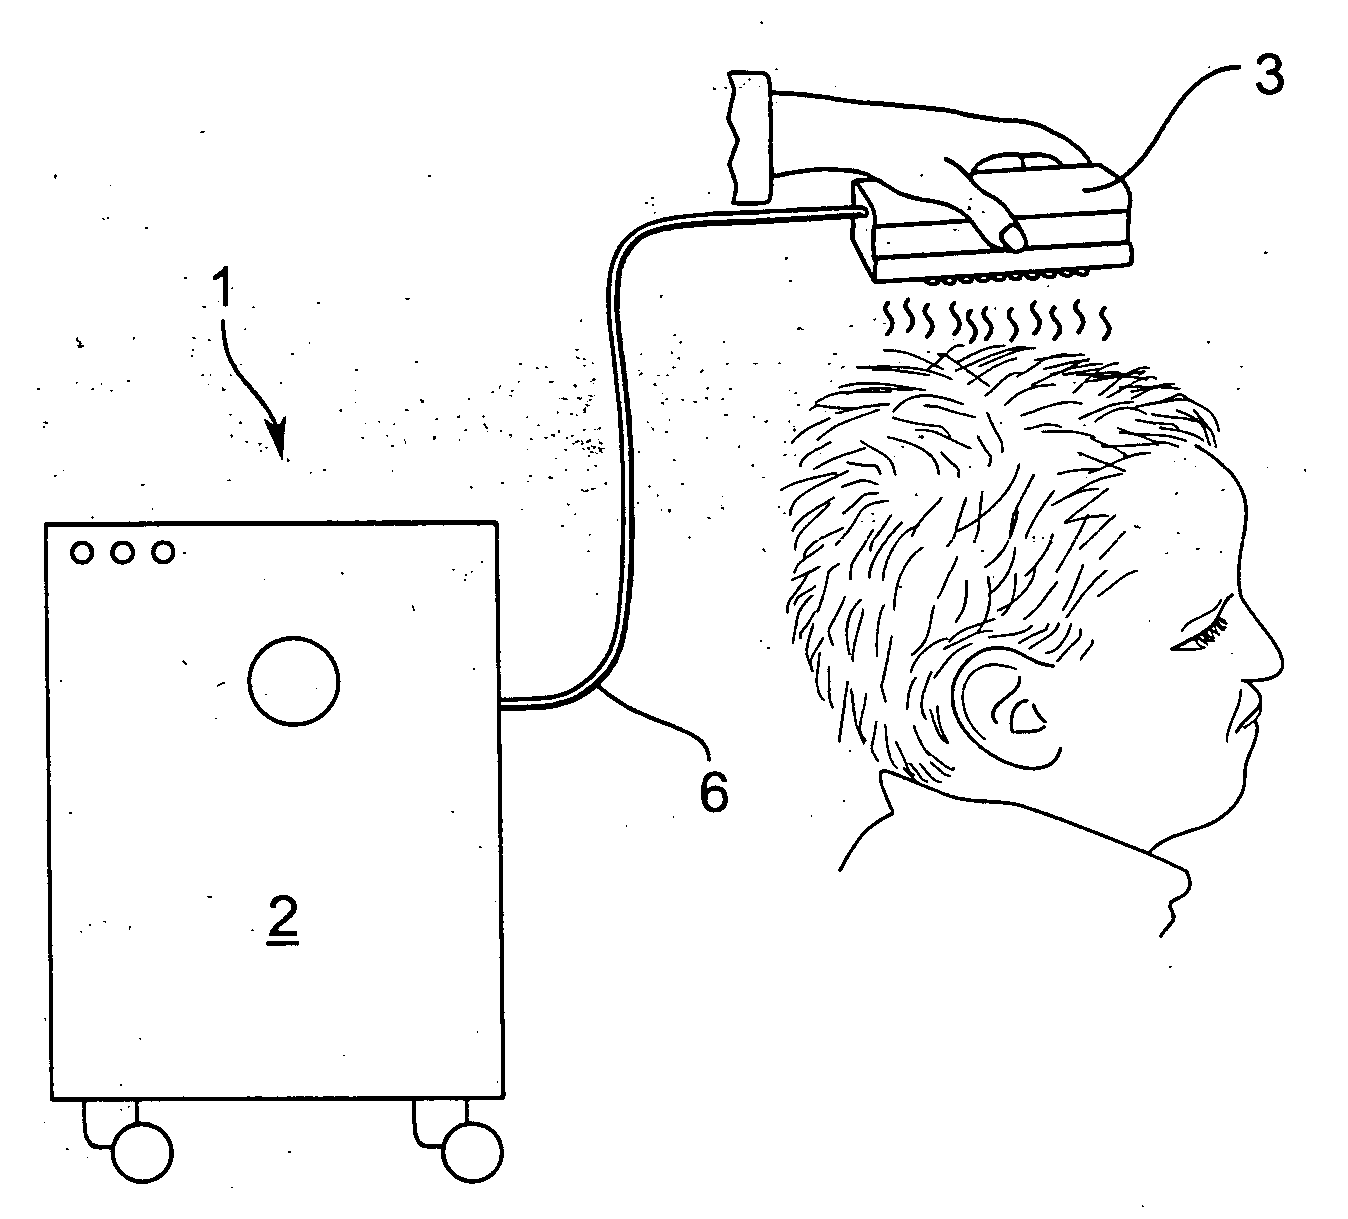 Apparatus for phototherapeutic treatment of skin disorders